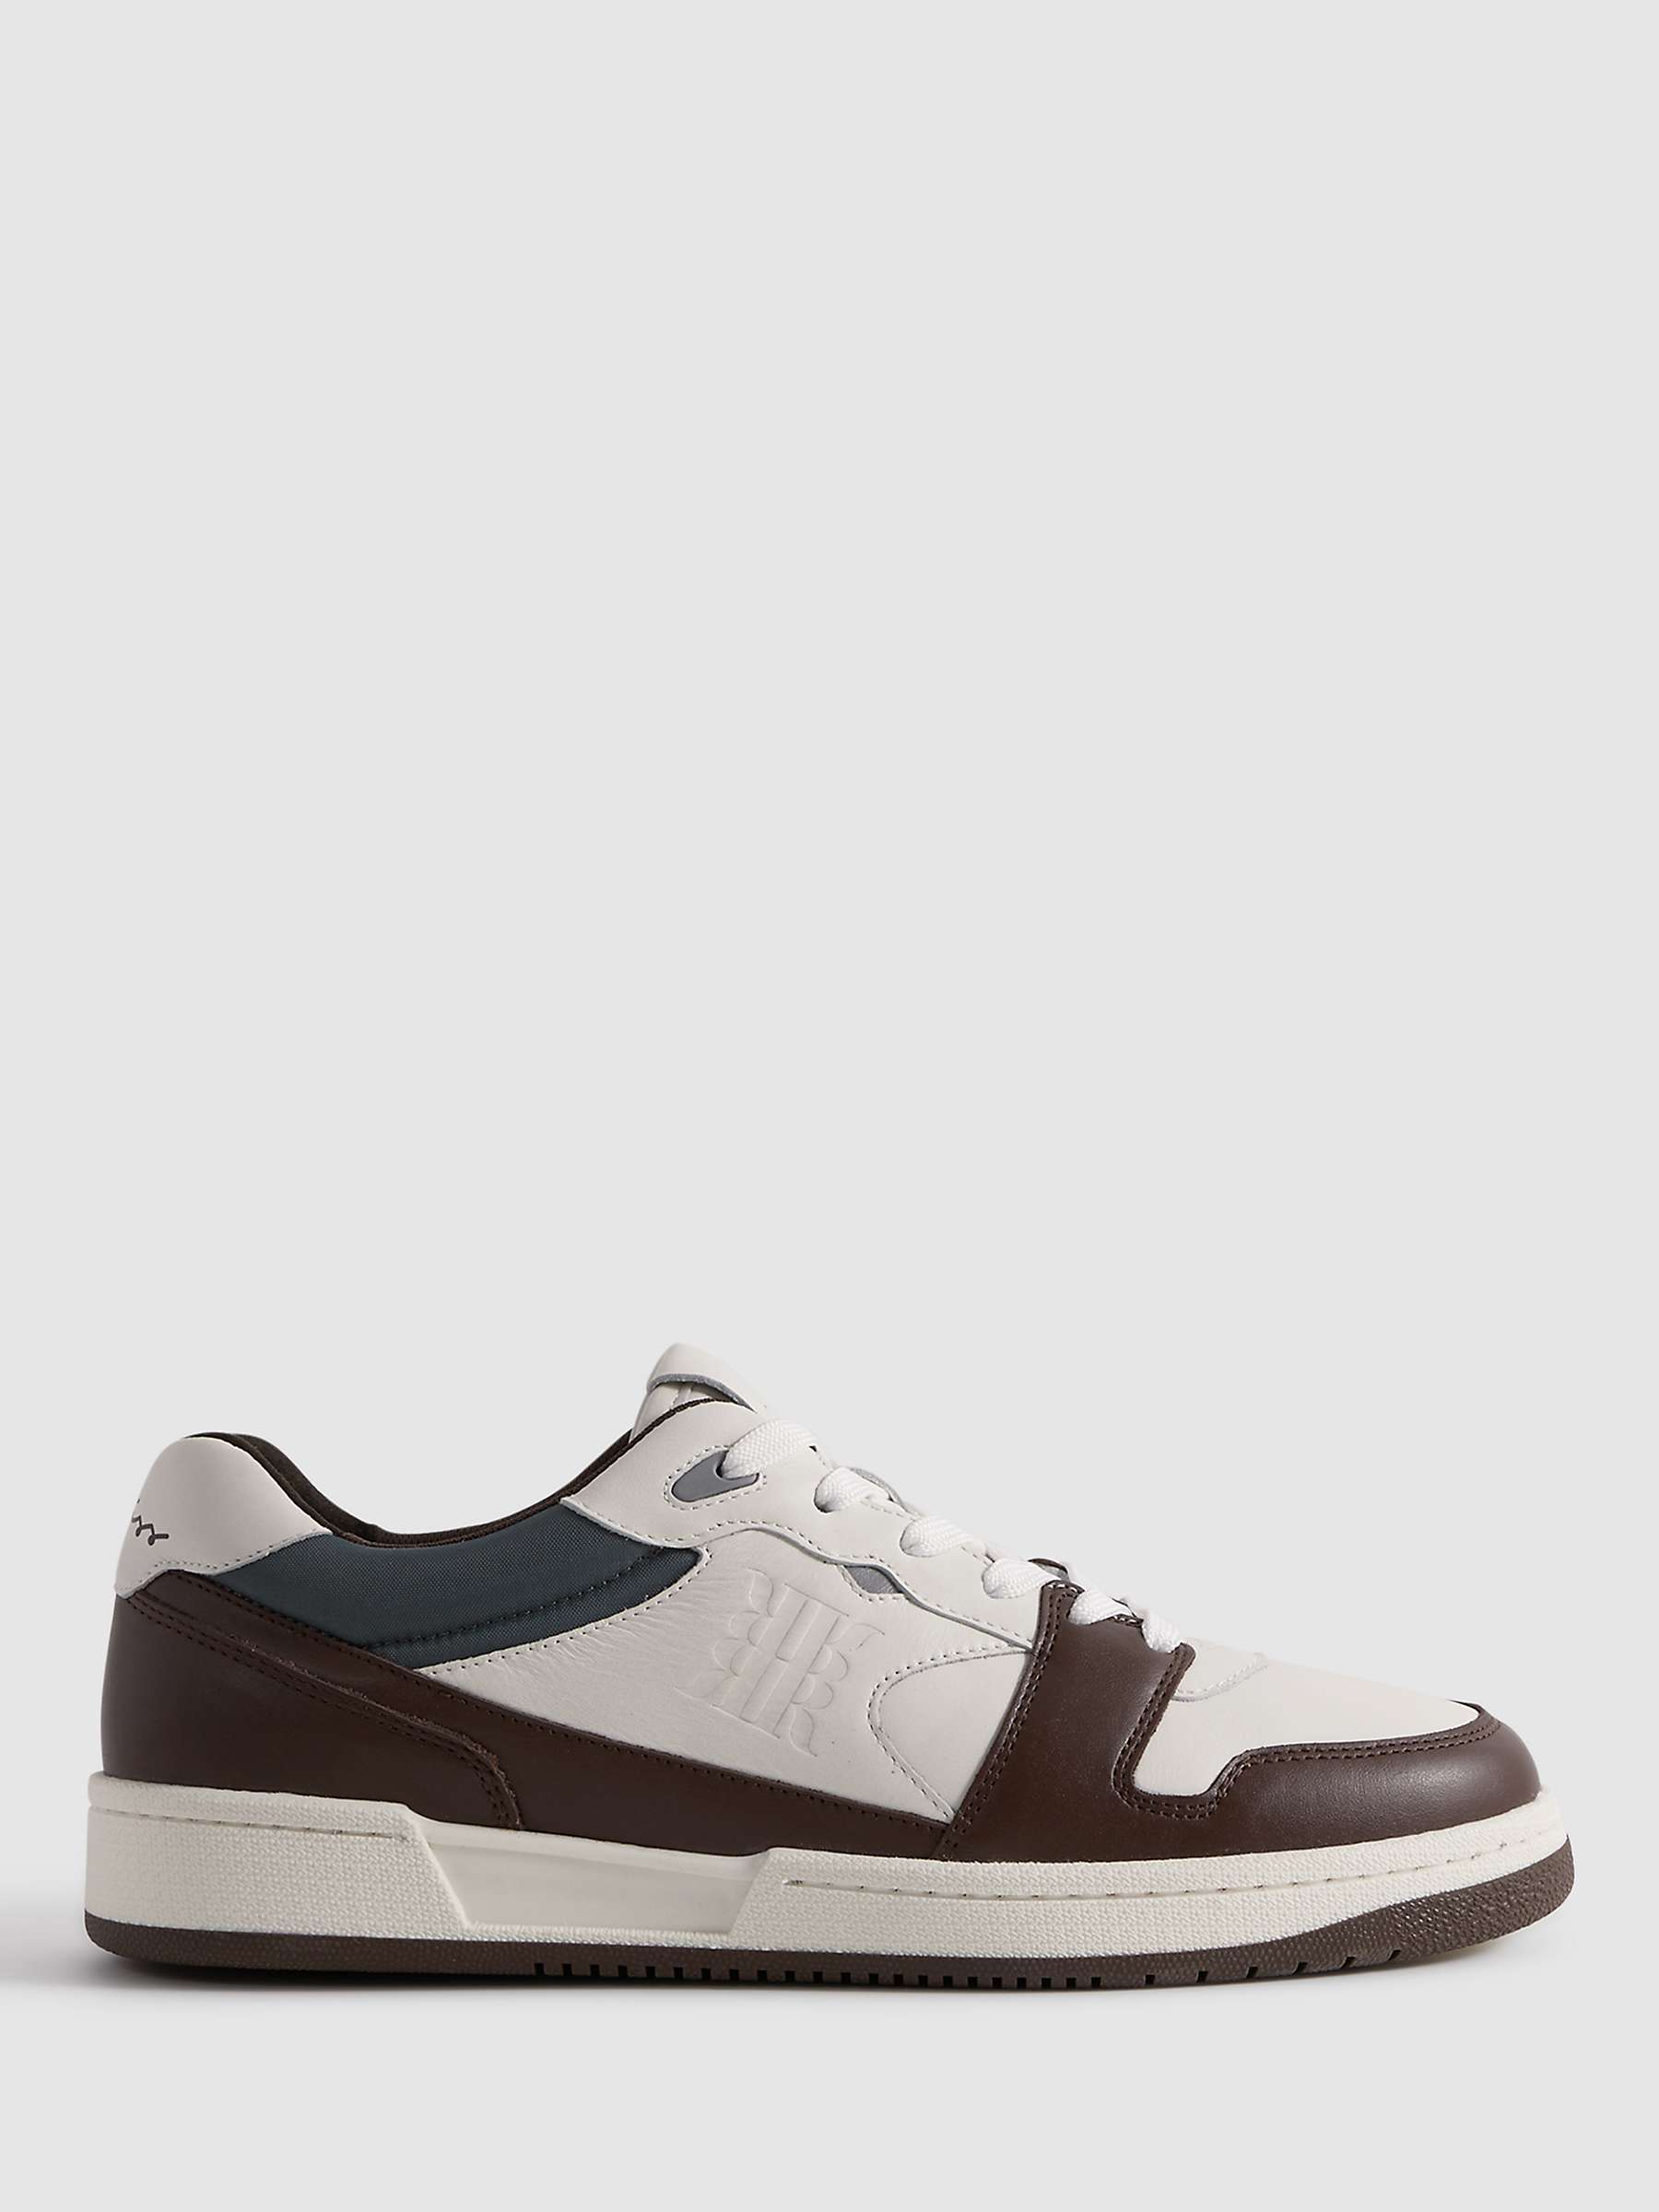 Buy Reiss Astor Low Top Leather Trainers Online at johnlewis.com